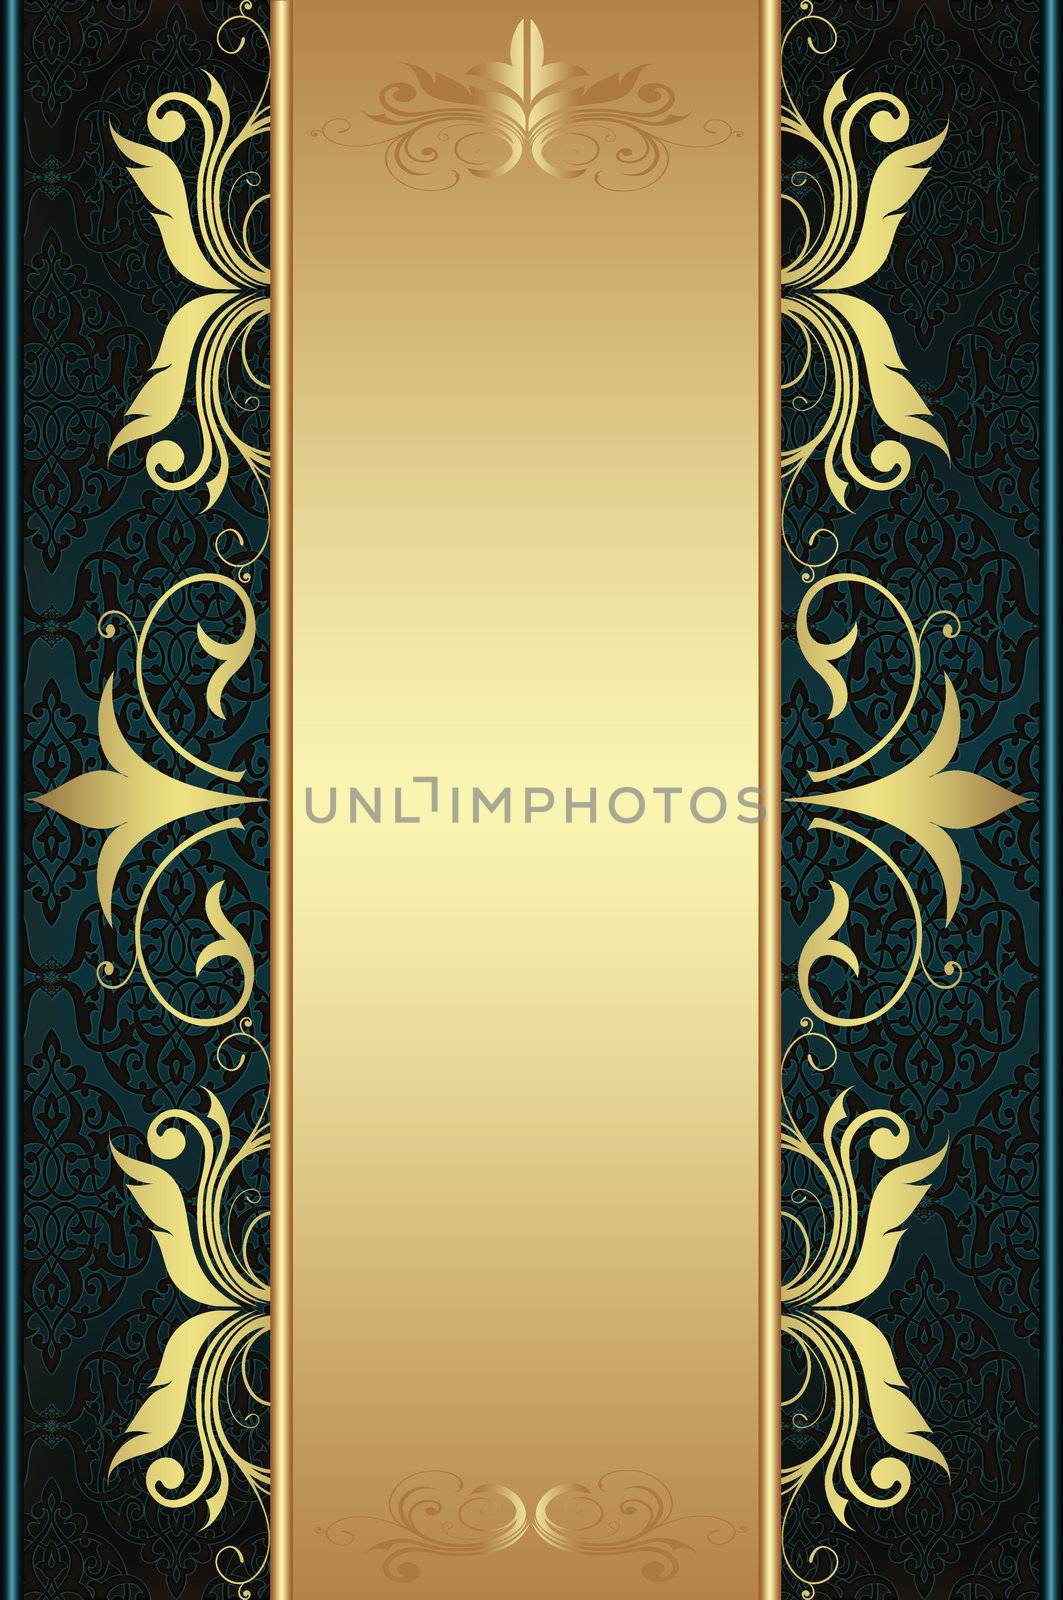 Golden banner with floral patterns